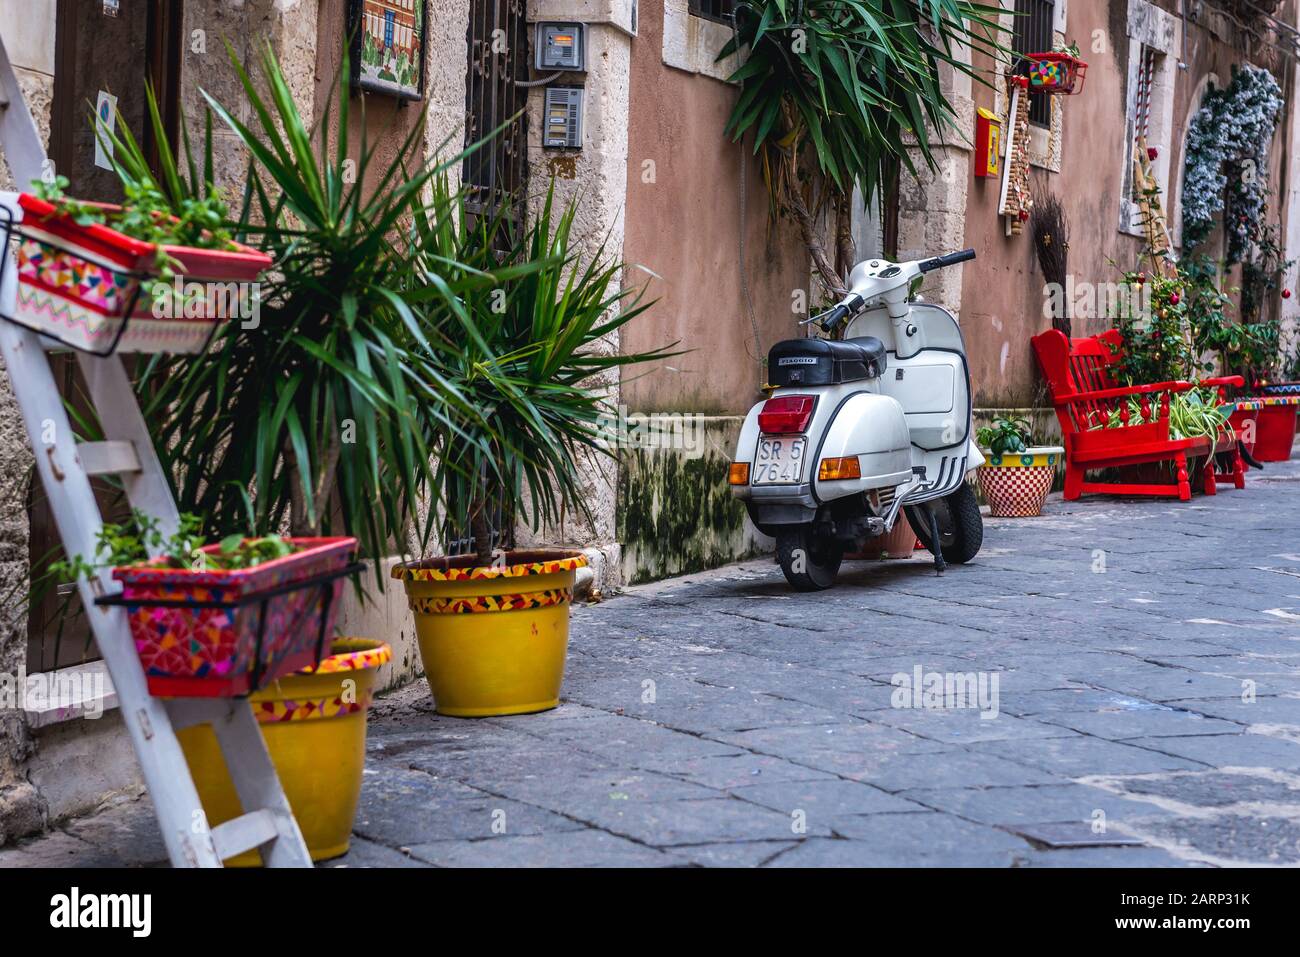 Green plants on a narrow street on the Ortygia island, historical part of Syracuse city, southeast corner of the island of Sicily, Italy Stock Photo